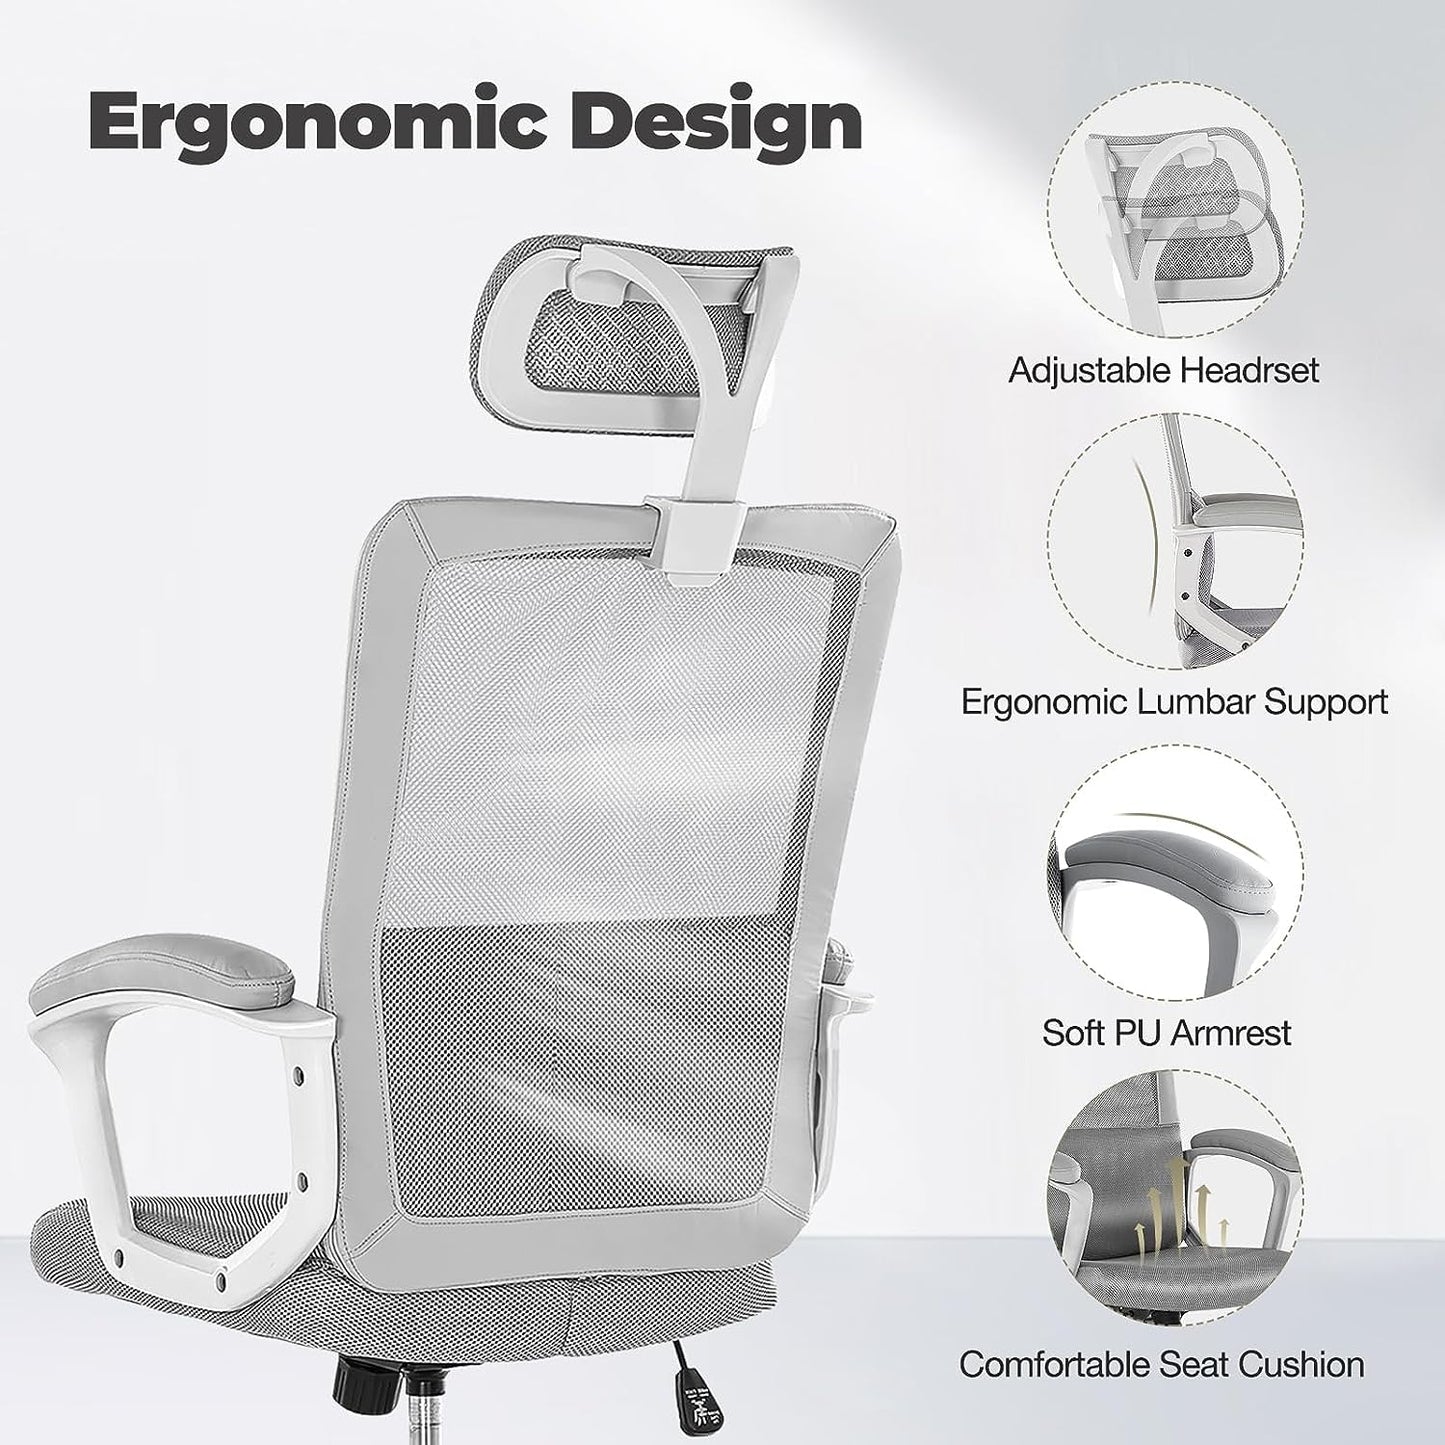 Ergonomic Home Mesh Swivel Rolling Office Desk Computer Chair with Adjustable Ergonomic Home Mesh Swivel Rolling Office Desk Computer Chair with Adjustable Headrest, Soft PU Armrest, Lumbar Support and Rocking Function, 18.11" D x 19.49" W x 43.5" H, Grey